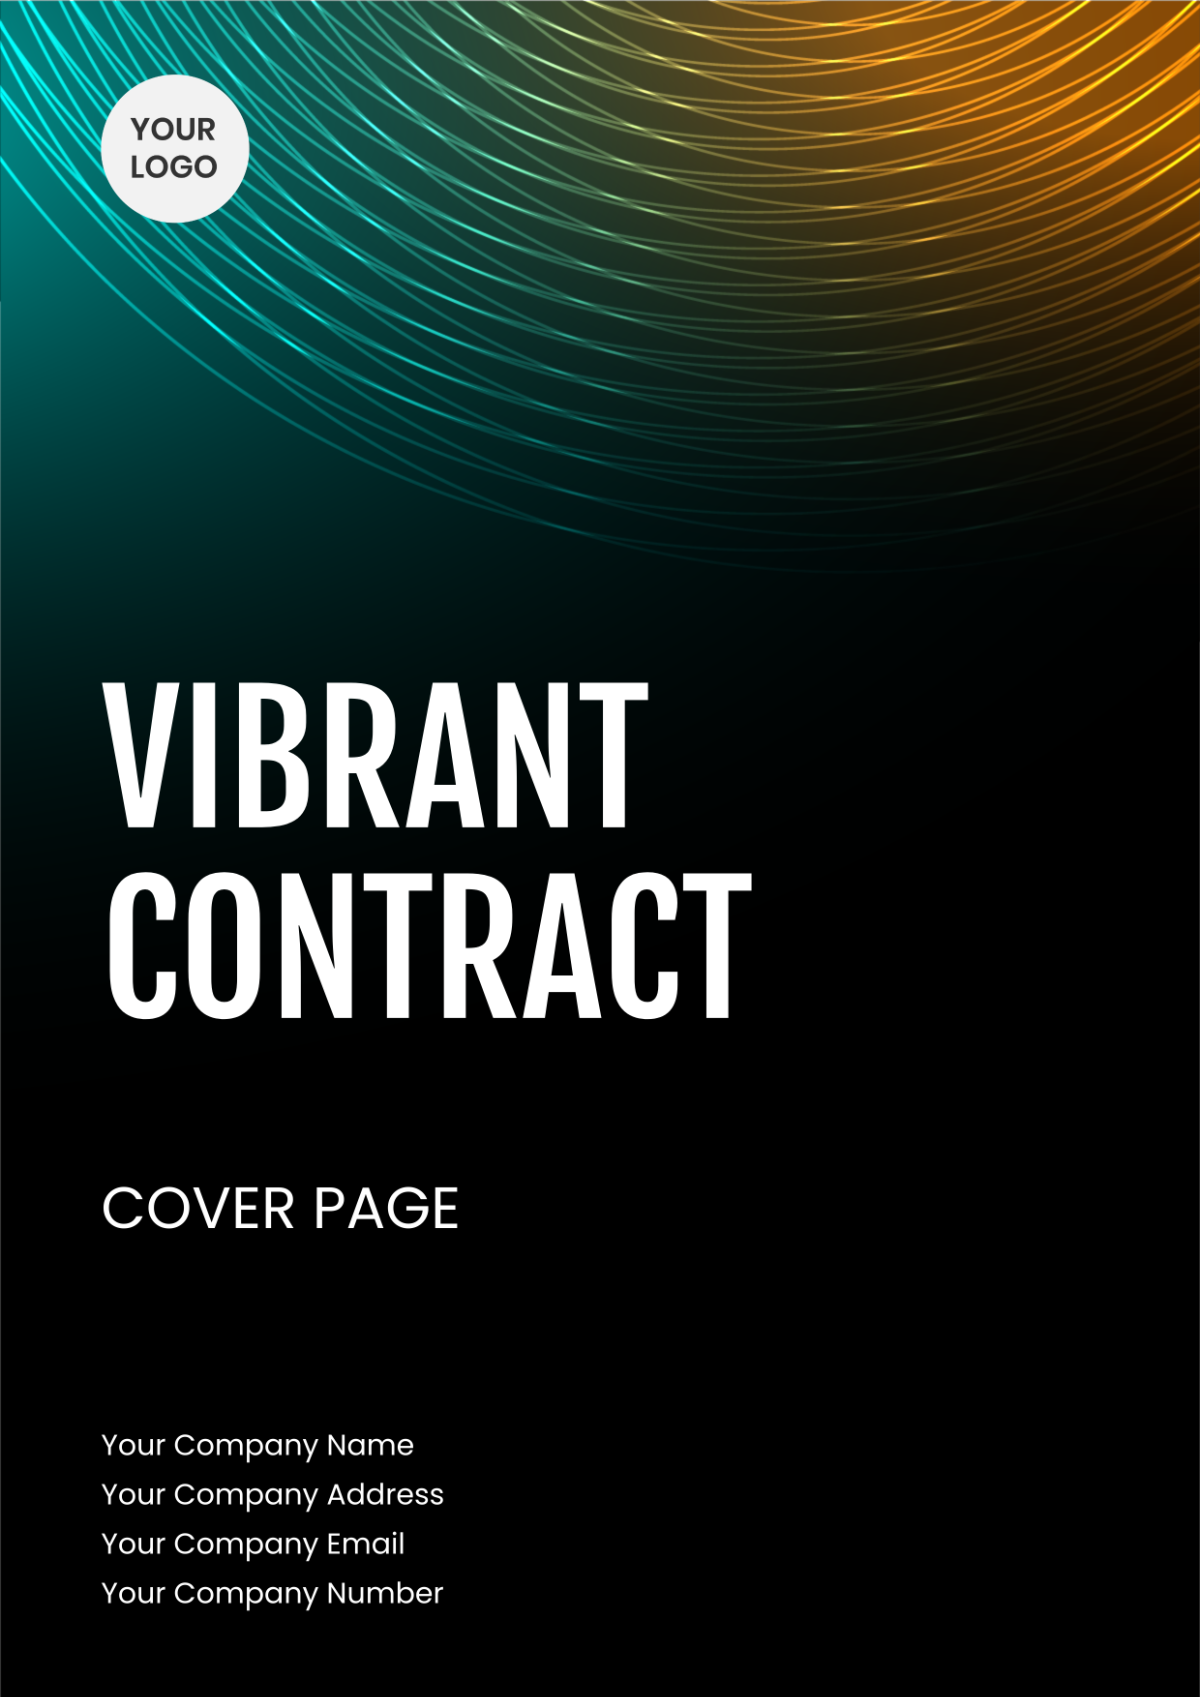 Vibrant Contract Cover Page